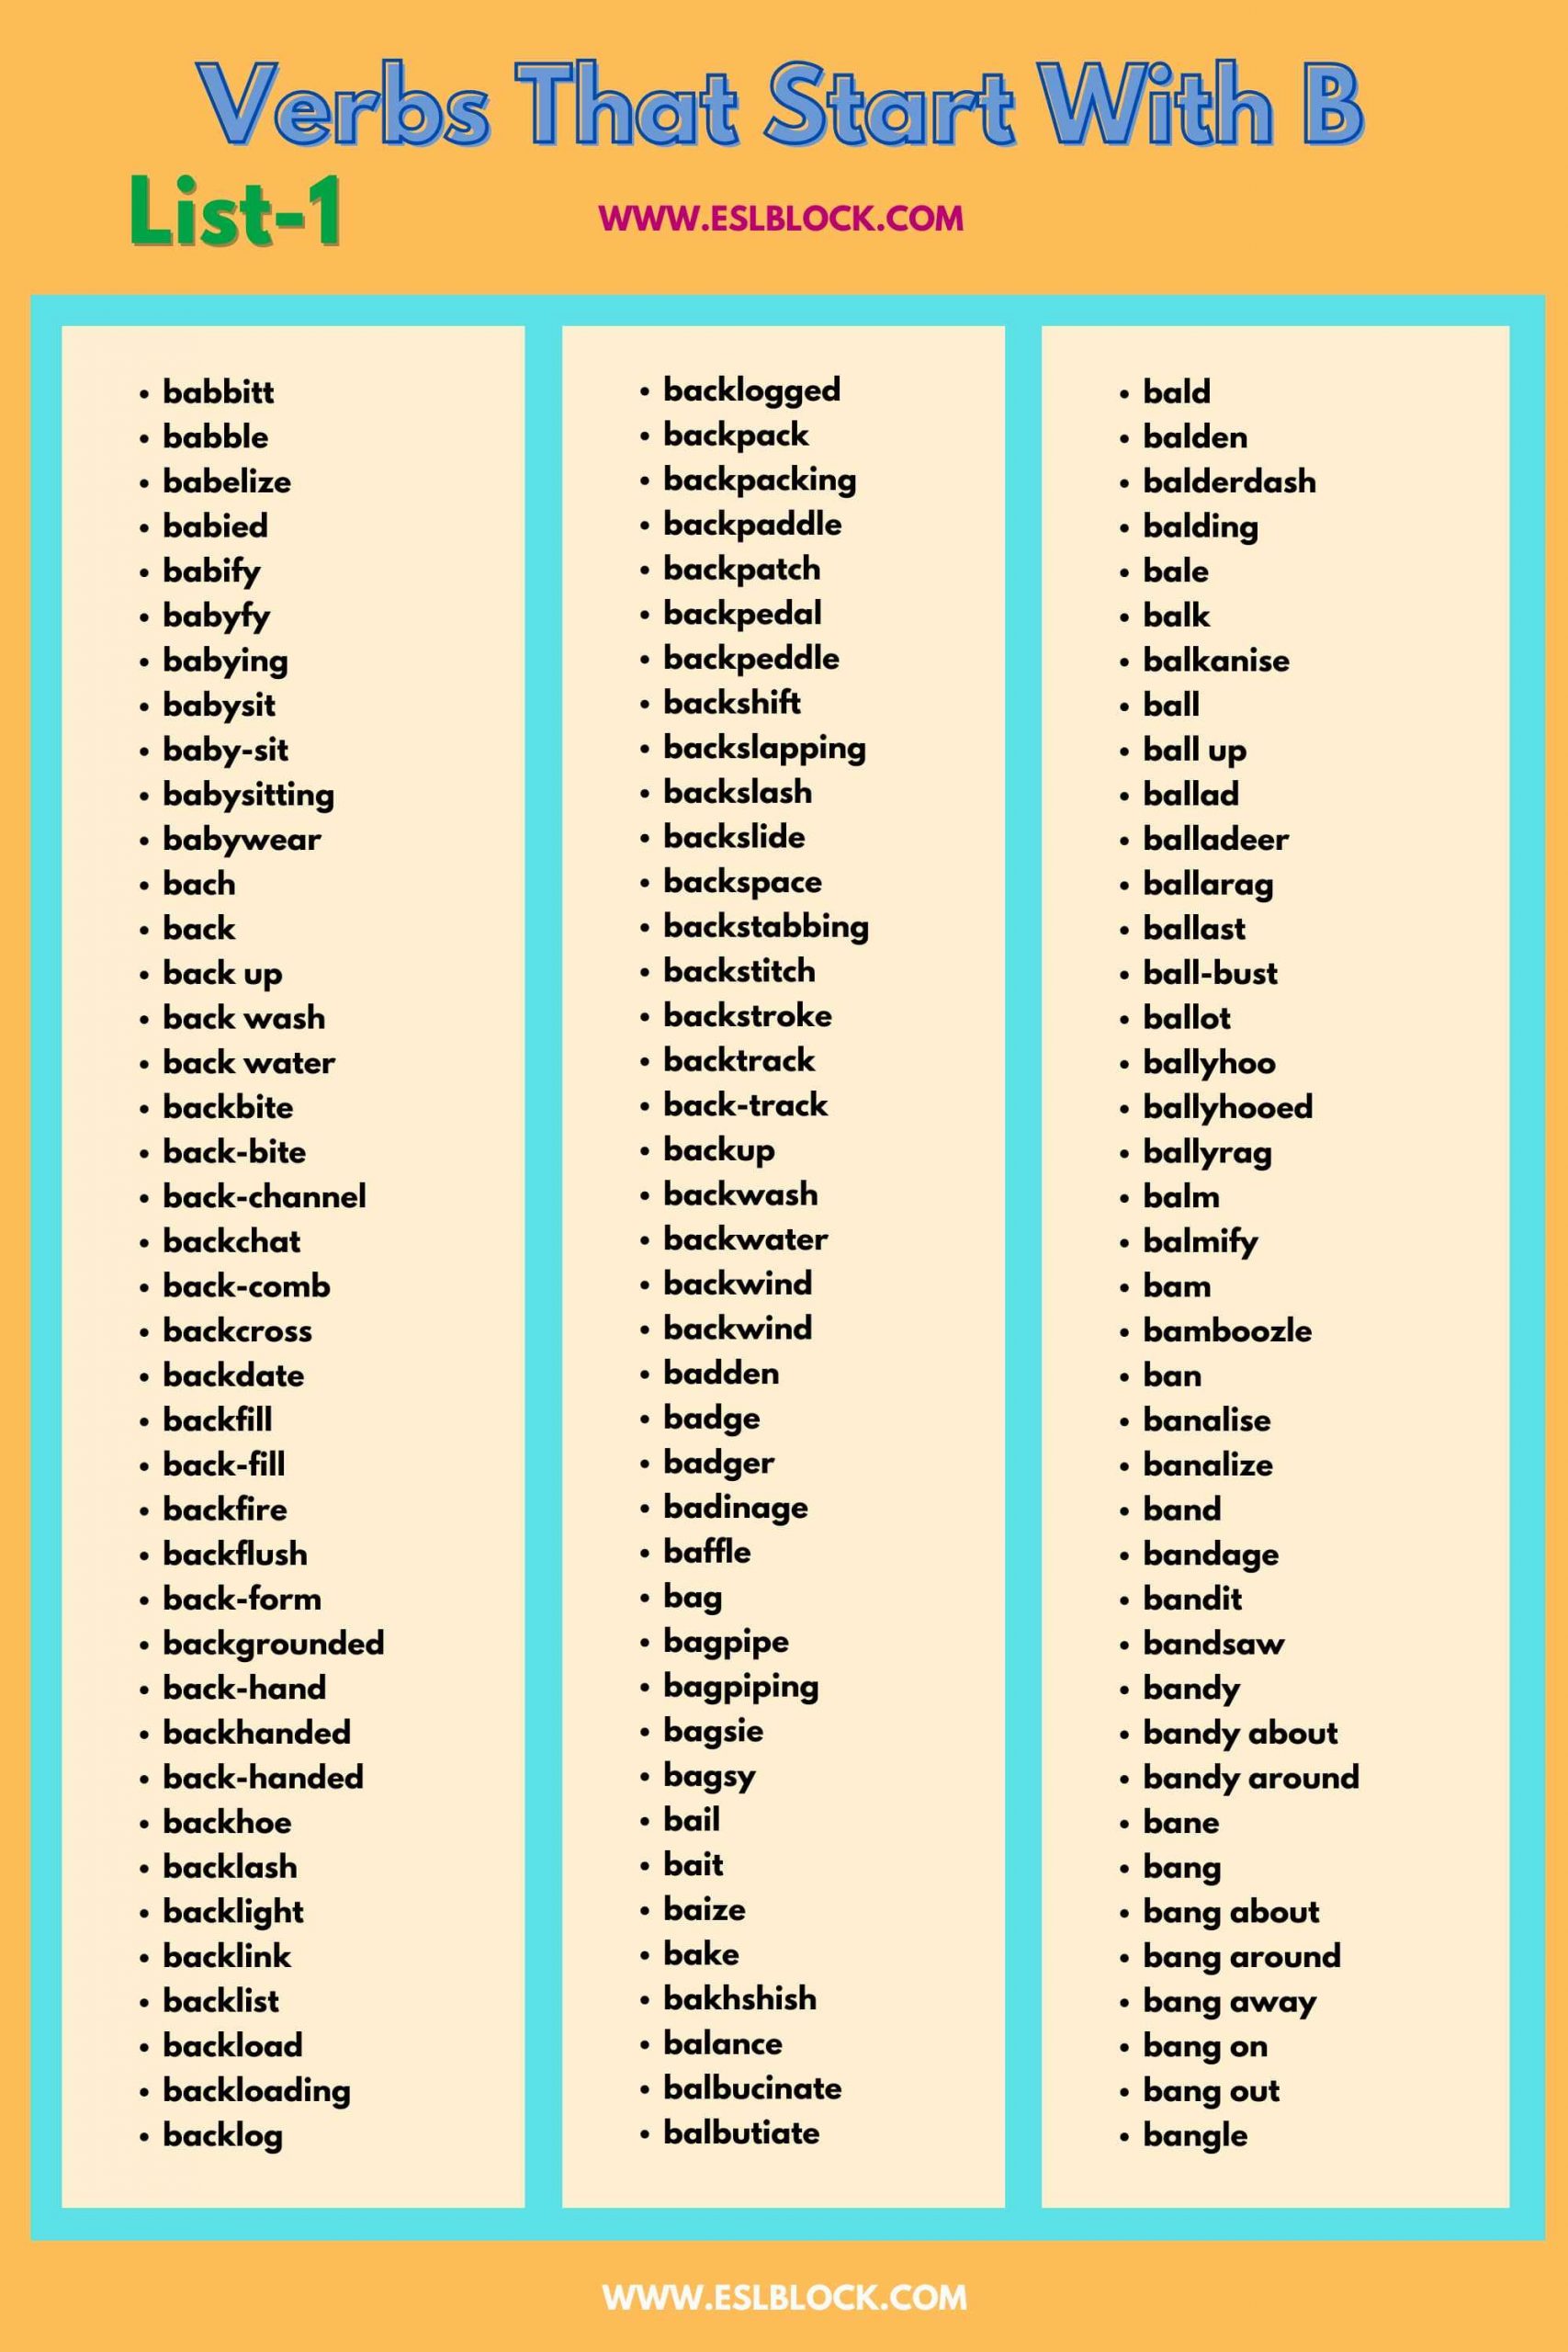 4 Letter Verbs, 5 Letter Verbs Starting With B, Action Words, Action Words That Start With B, B Action Words, B Verbs, B Verbs in English, English, English Grammar, English Vocabulary, English Words, List of Verbs That Start With B, Verbs List, Verbs That Start With B, Vocabulary, Words That Start With B